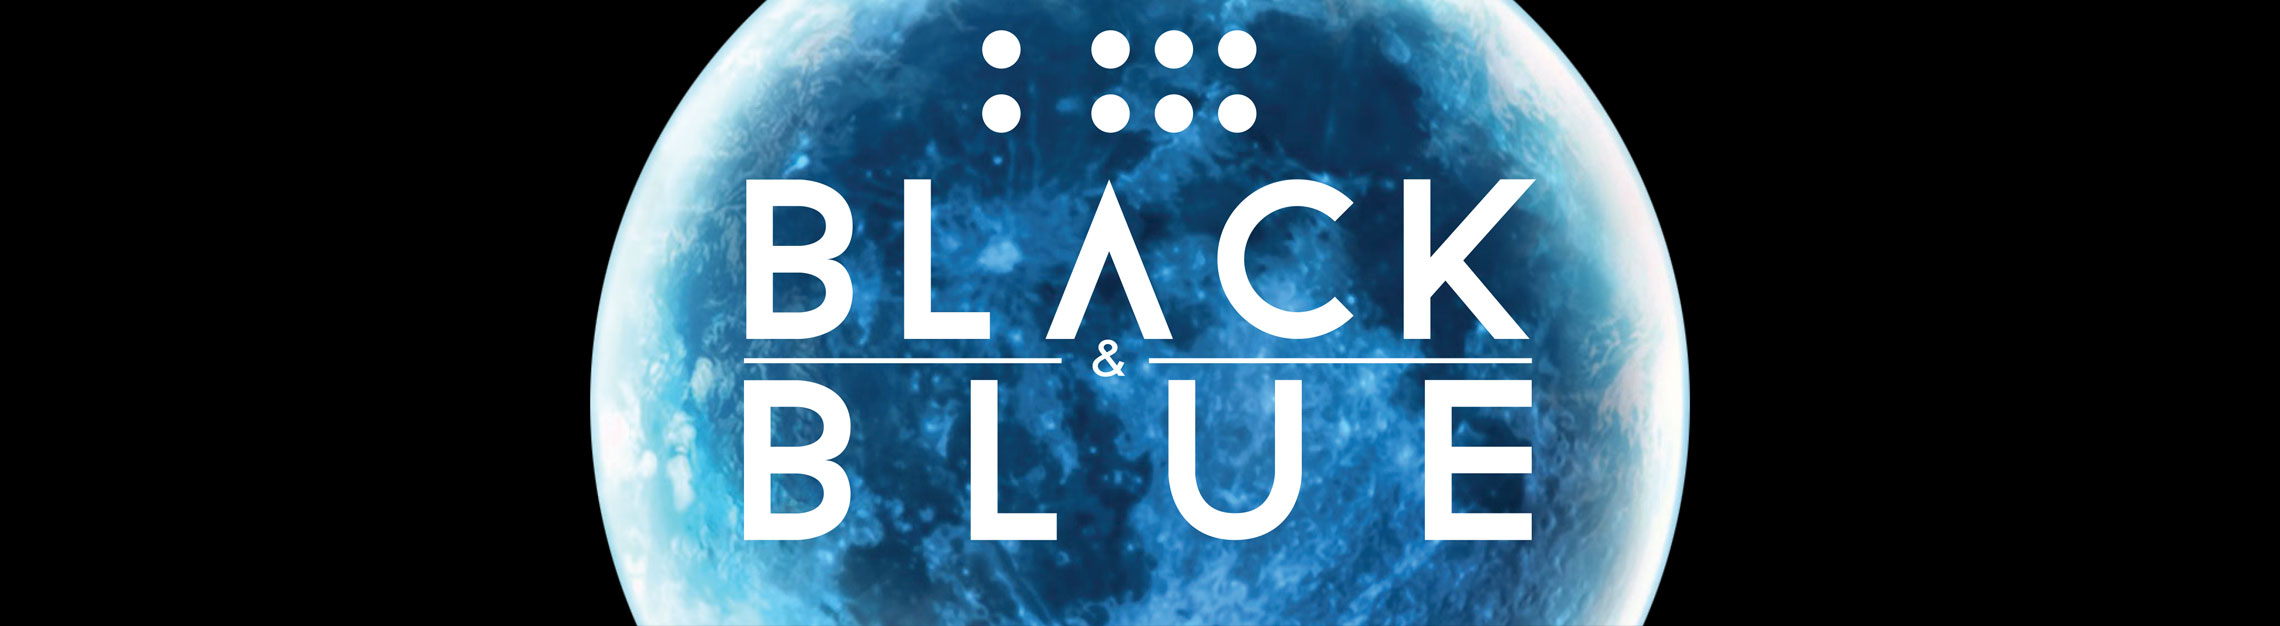 black-and-blue-2016-banner